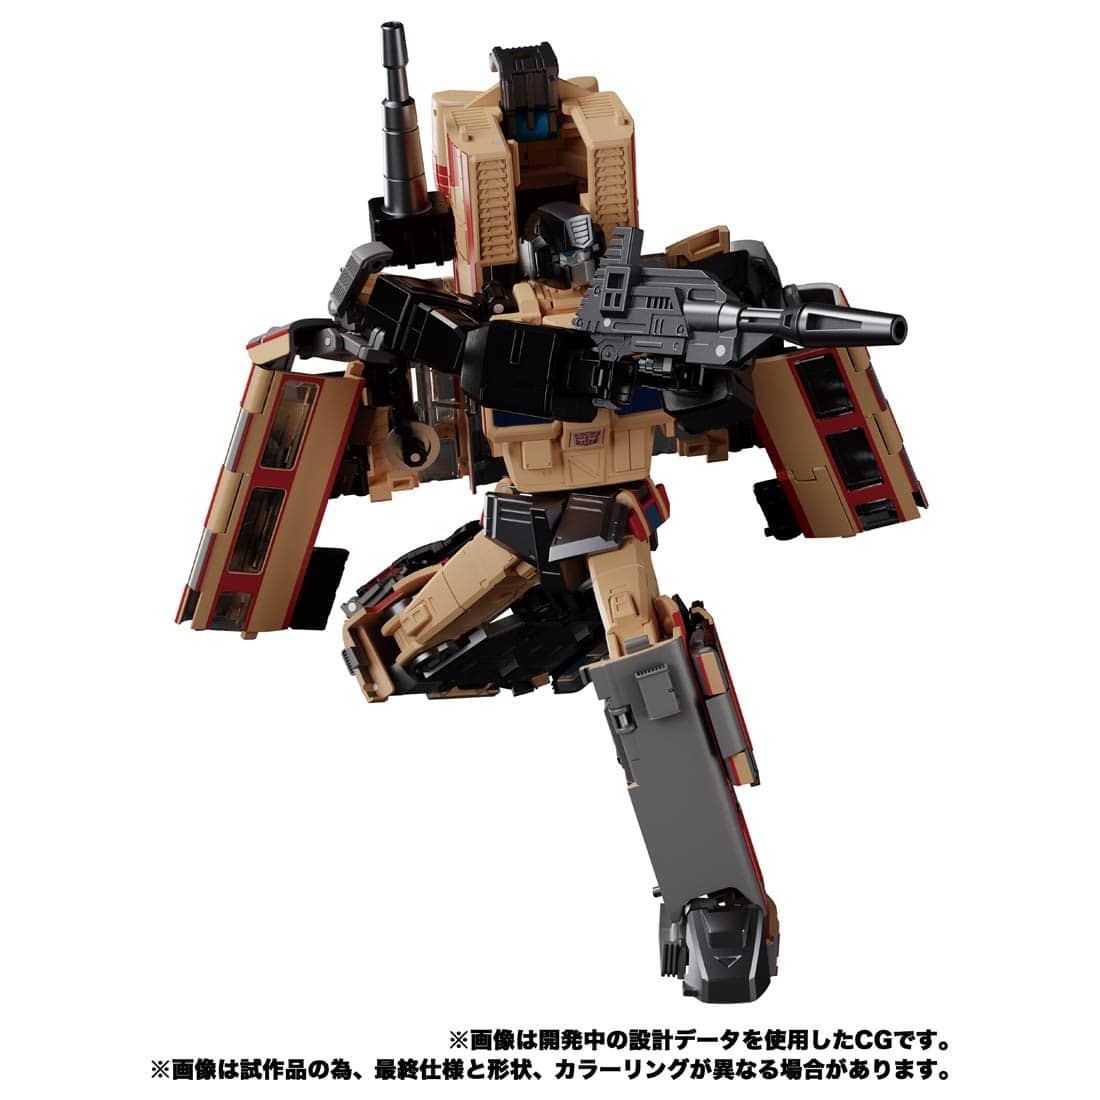 Transformers News: Masterpiece G MPG-05 Seizan gets Fully Revealed